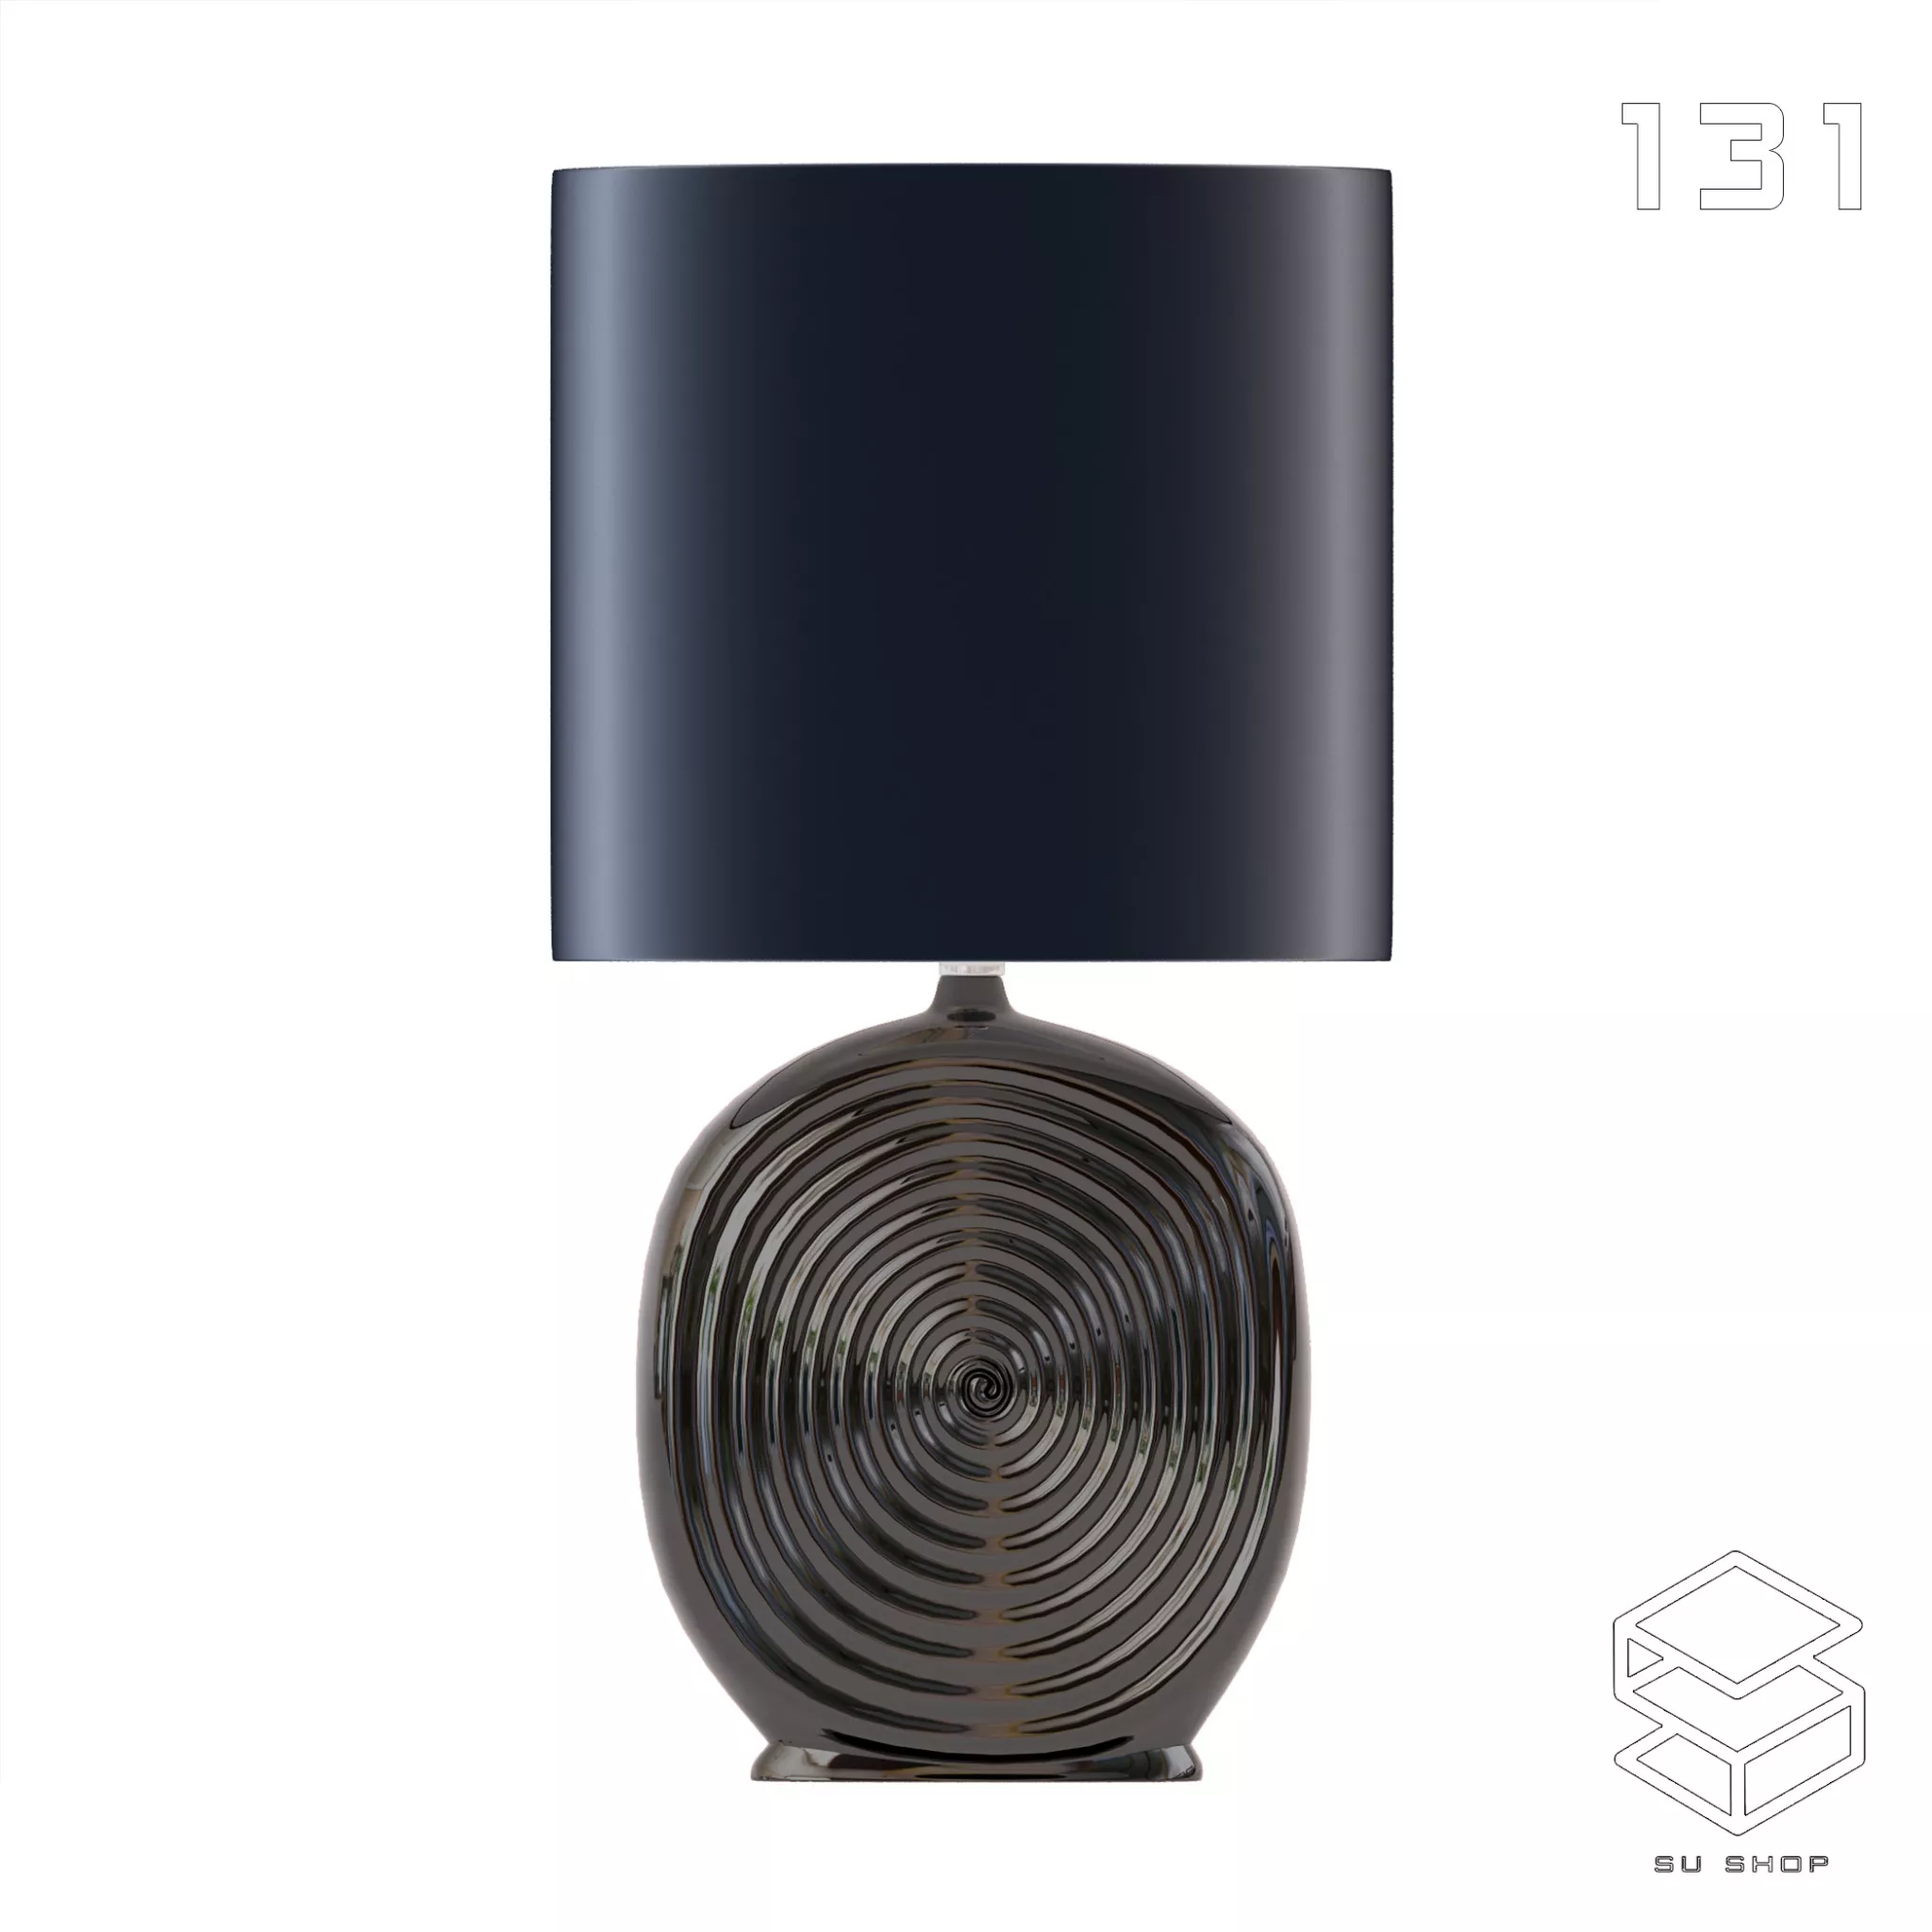 MODERN TABLE LAMP - SKETCHUP 3D MODEL - VRAY OR ENSCAPE - ID14699